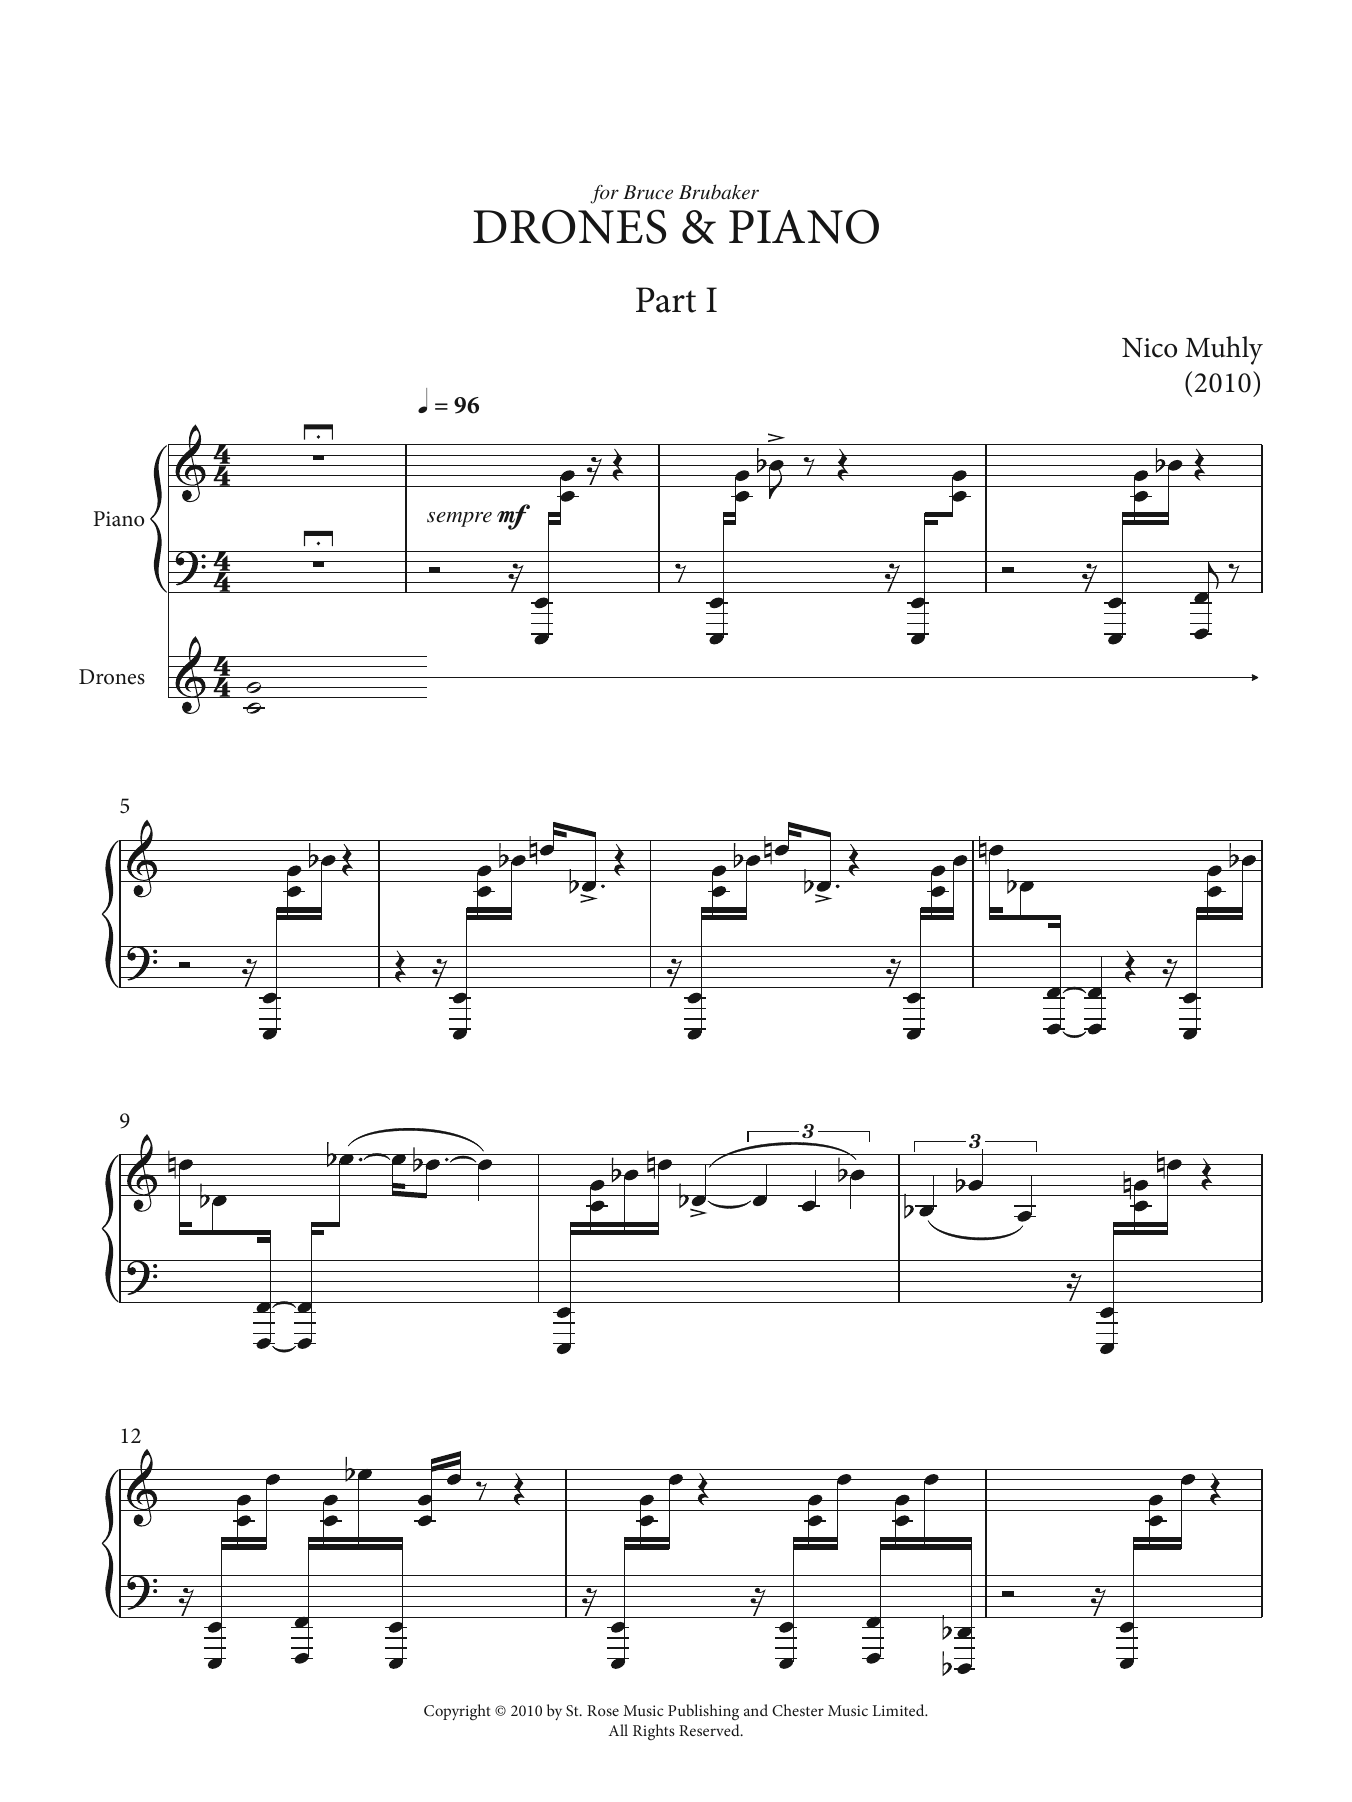 Download Nico Muhly Drones And Piano Sheet Music